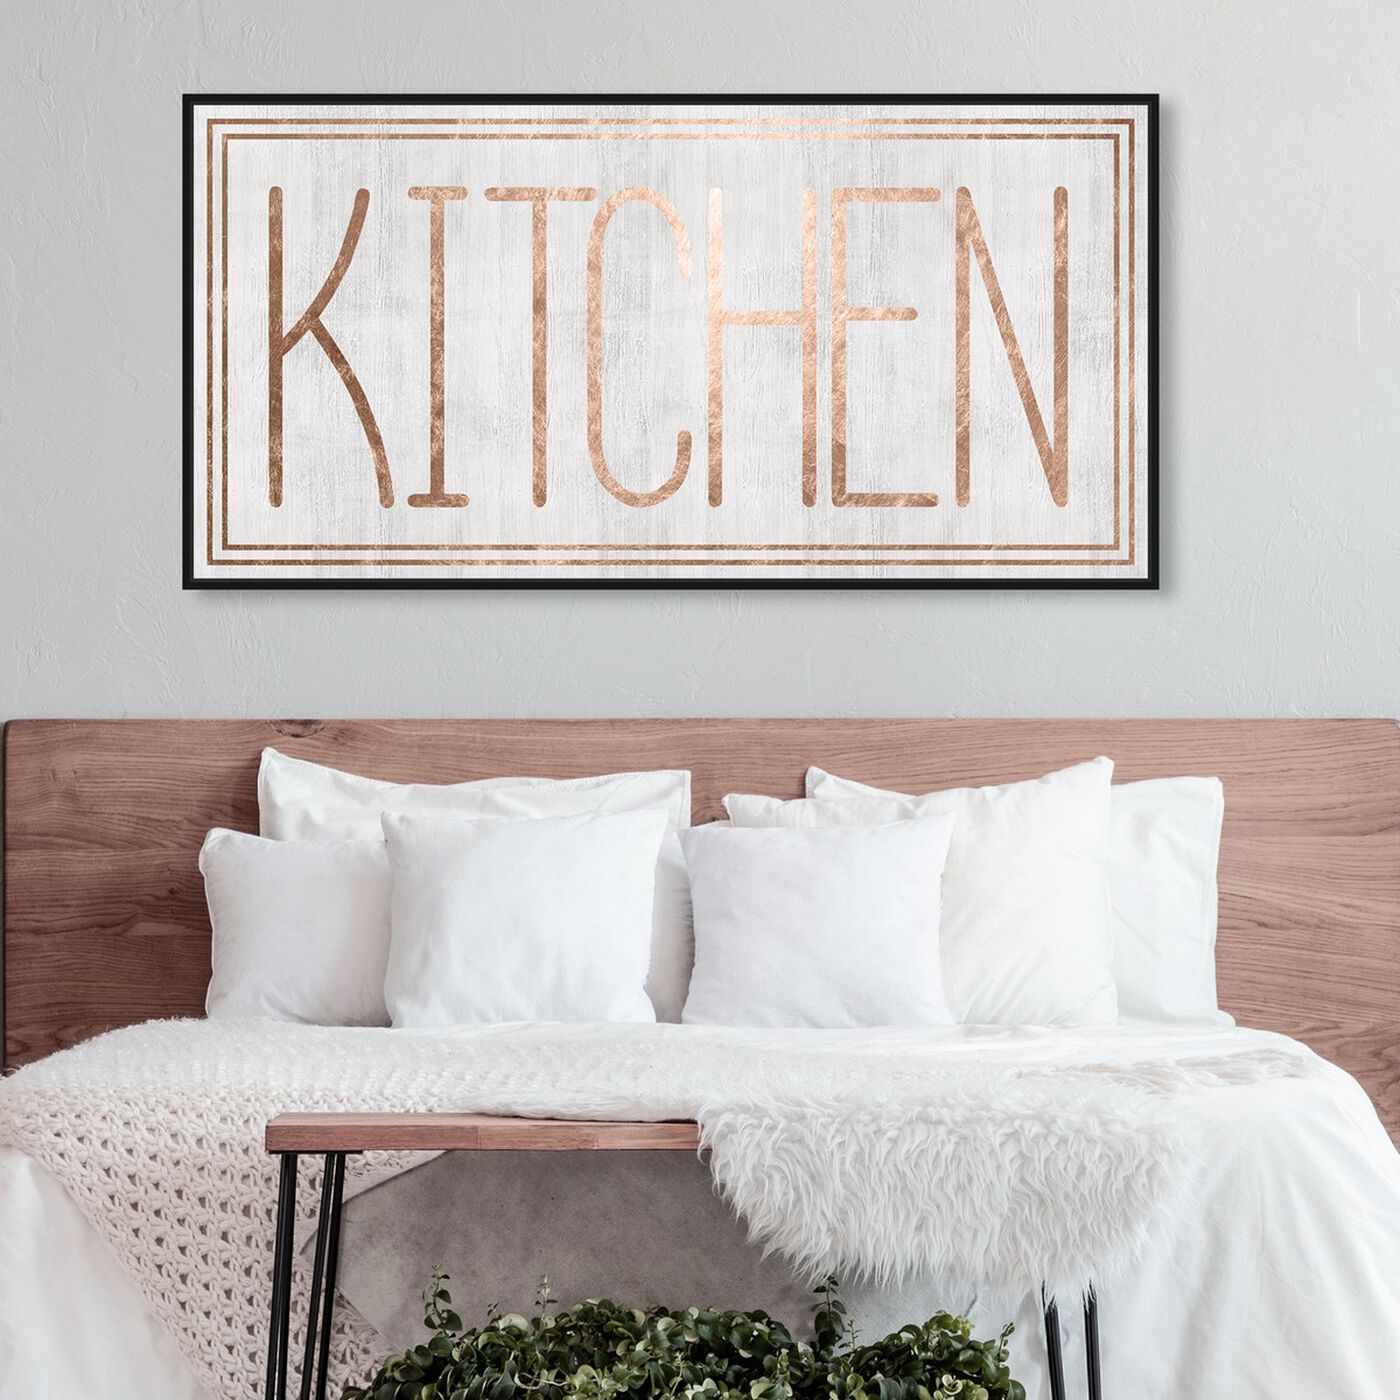 Hanging view of Kitchen featuring food and cuisine and kitchen art.